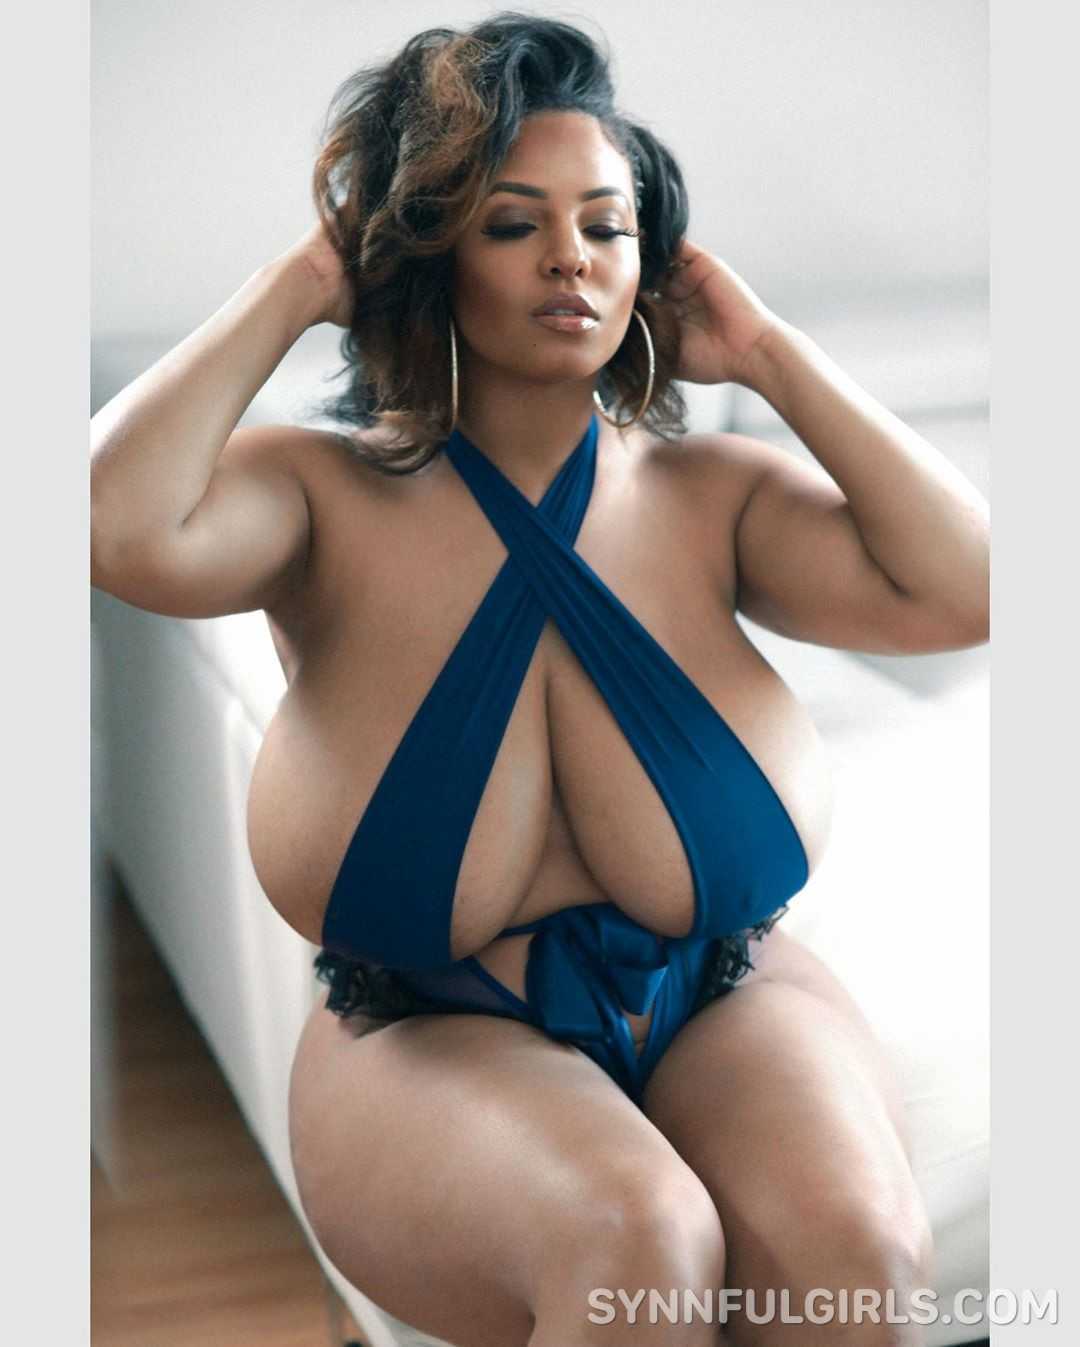 Stephanie N. – THiCC, Busty, Beyonce Lookalike Mama with Ginormous Boobs!